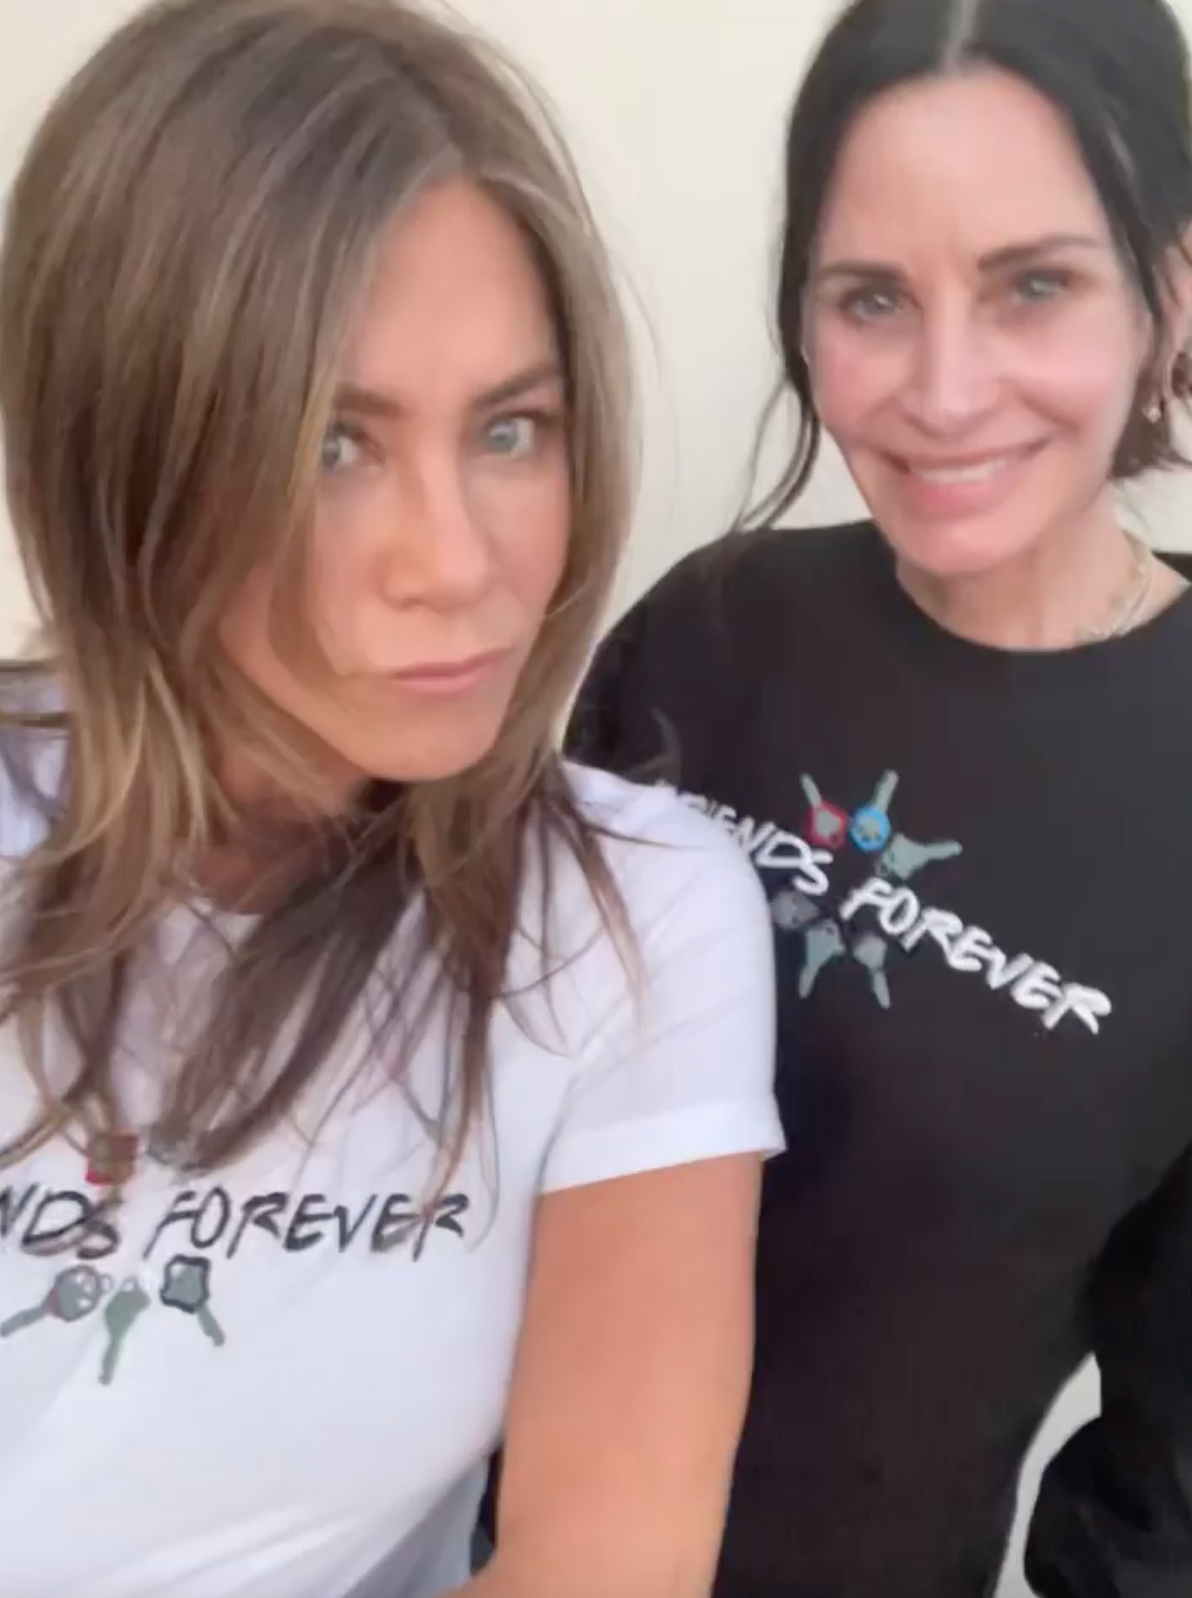 Courteney Cox With No Makeup: Unfiltered Photos of the Actress